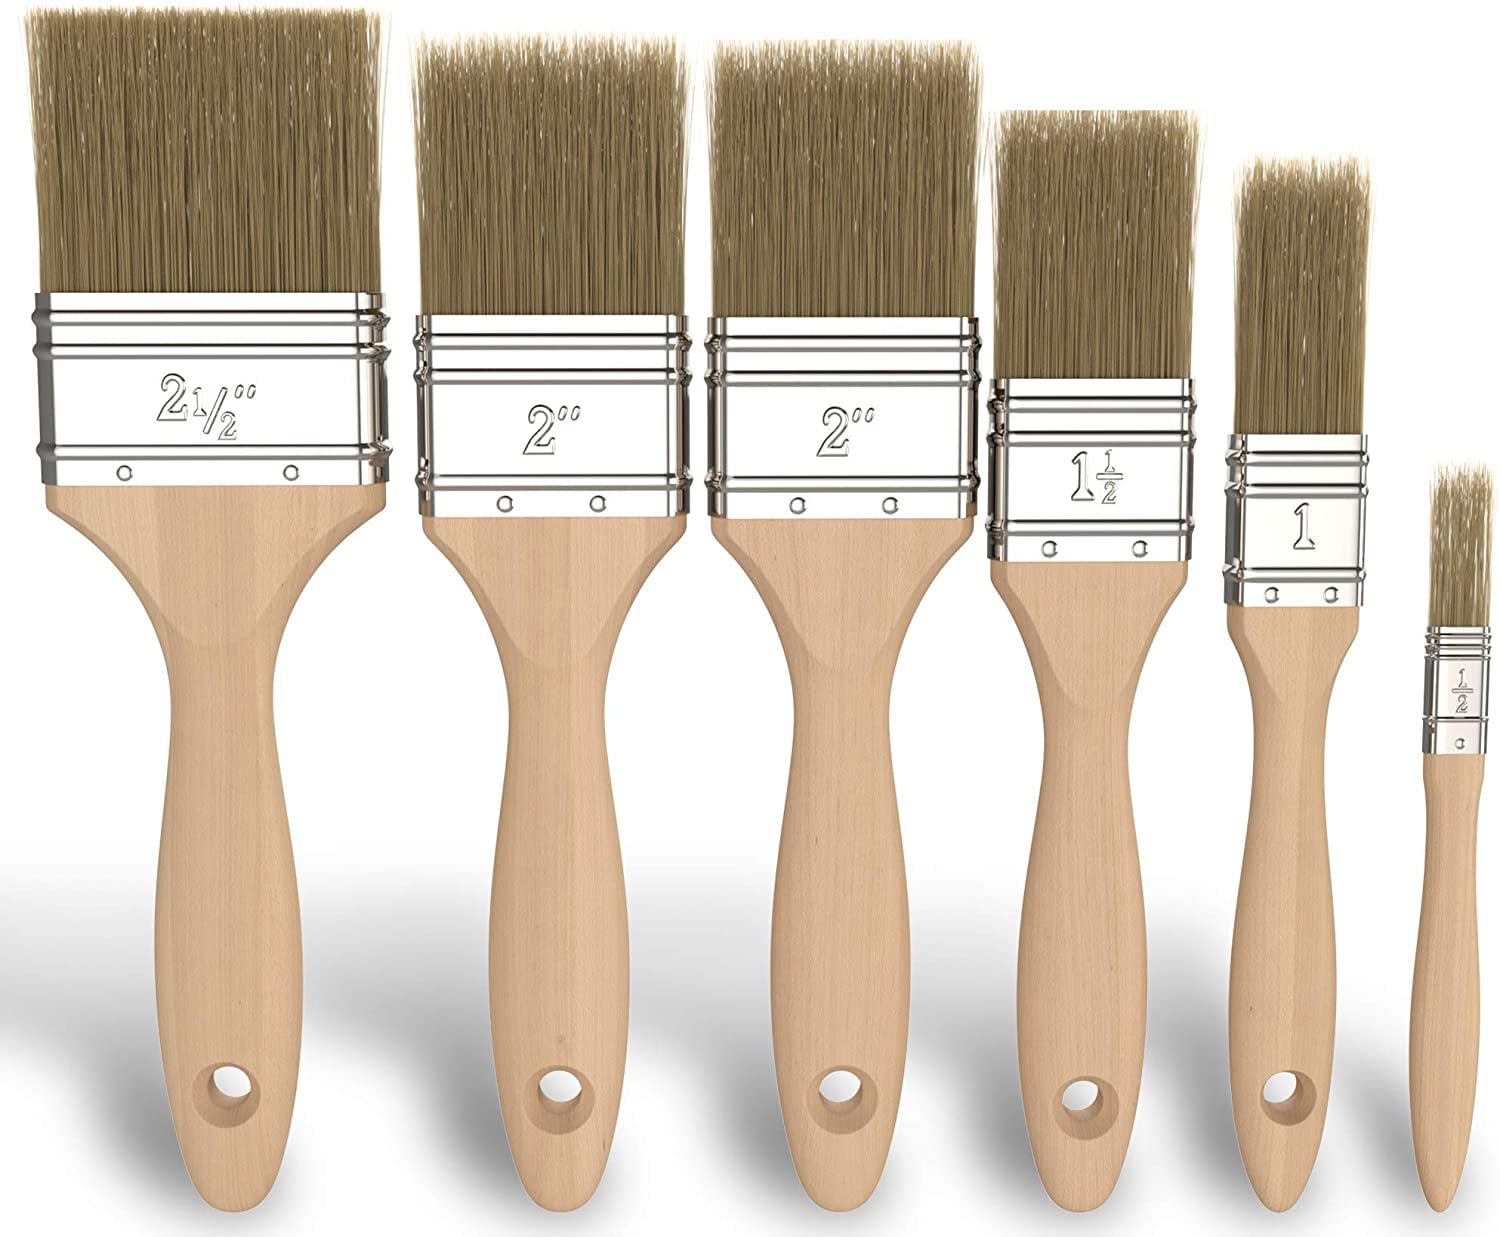 1. Fine Detail Paint Brush Set - 7 Pieces Miniature Brushes for Watercolor, Acrylic Painting, Nail Art, Miniatures, Model - wide 9